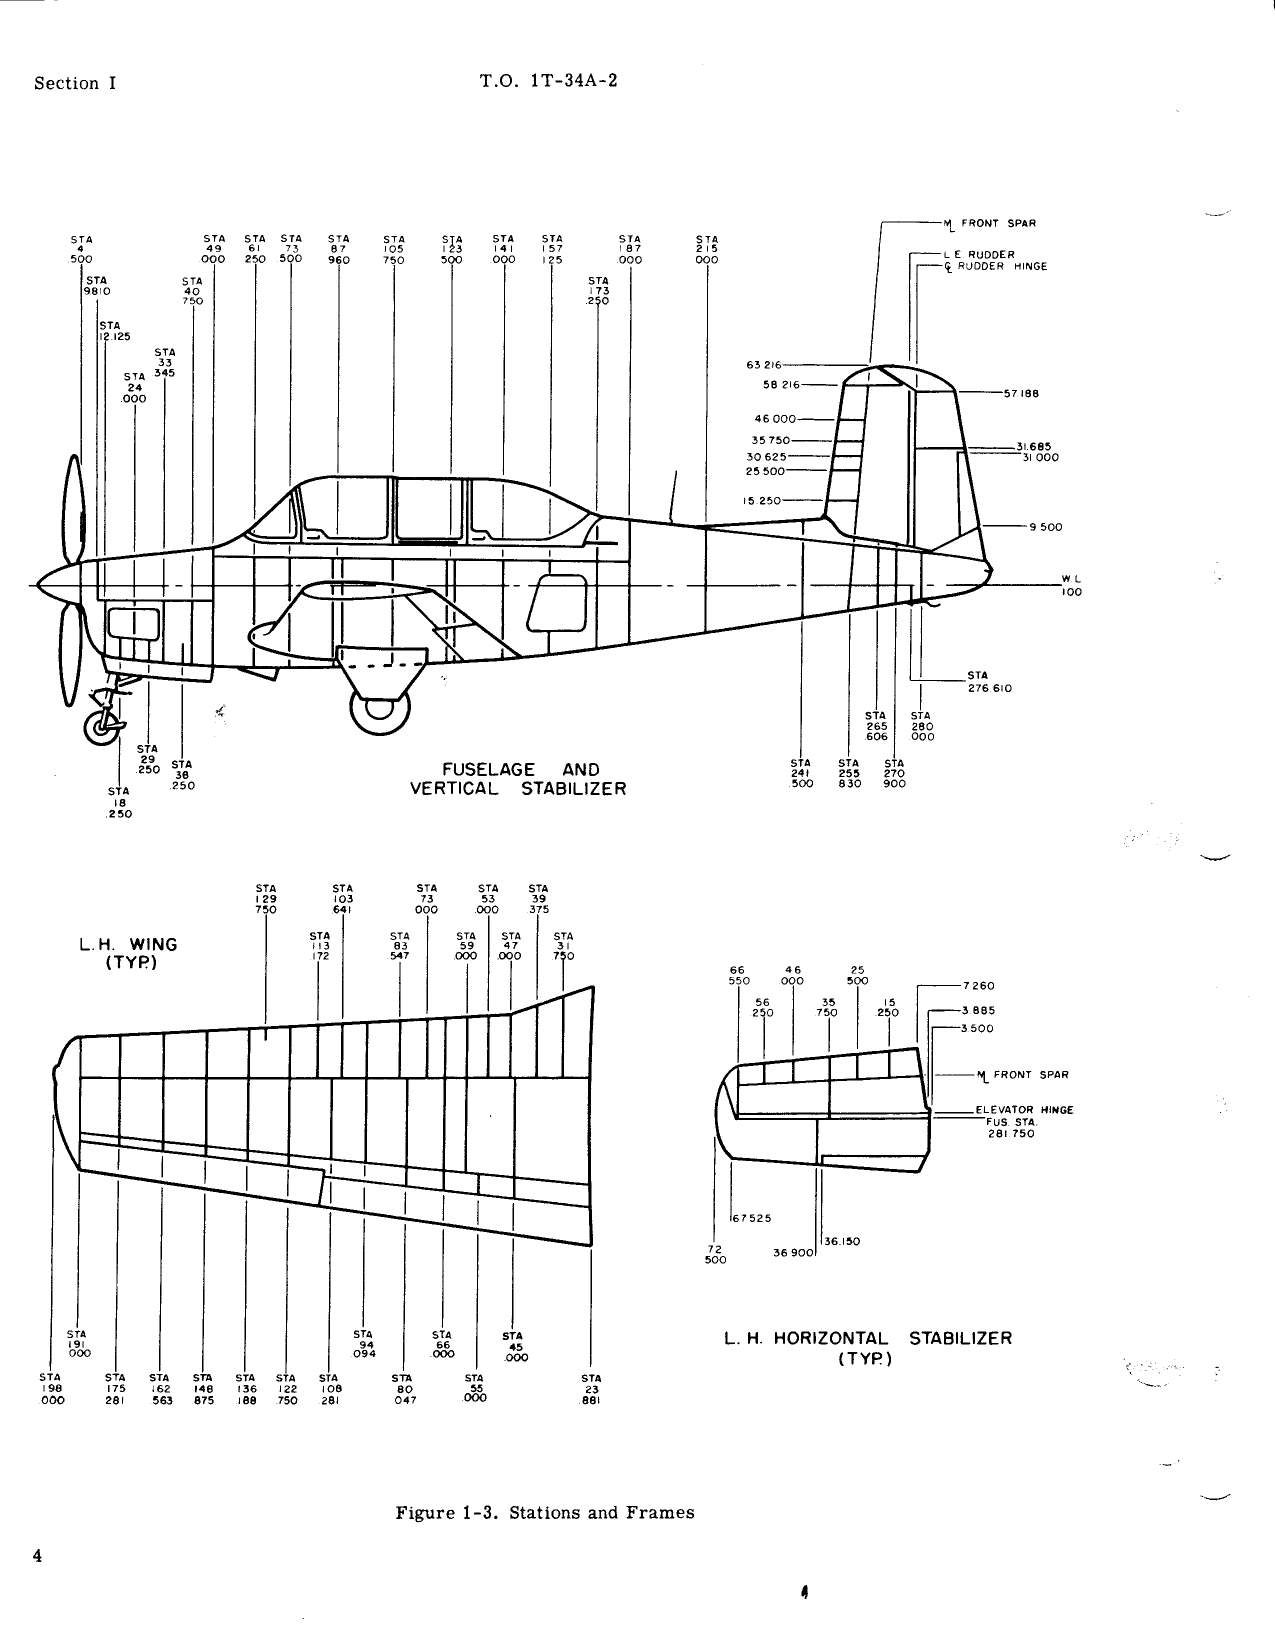 Sample page 16 from AirCorps Library document: Maintenance Manual for T-34A Aircraft